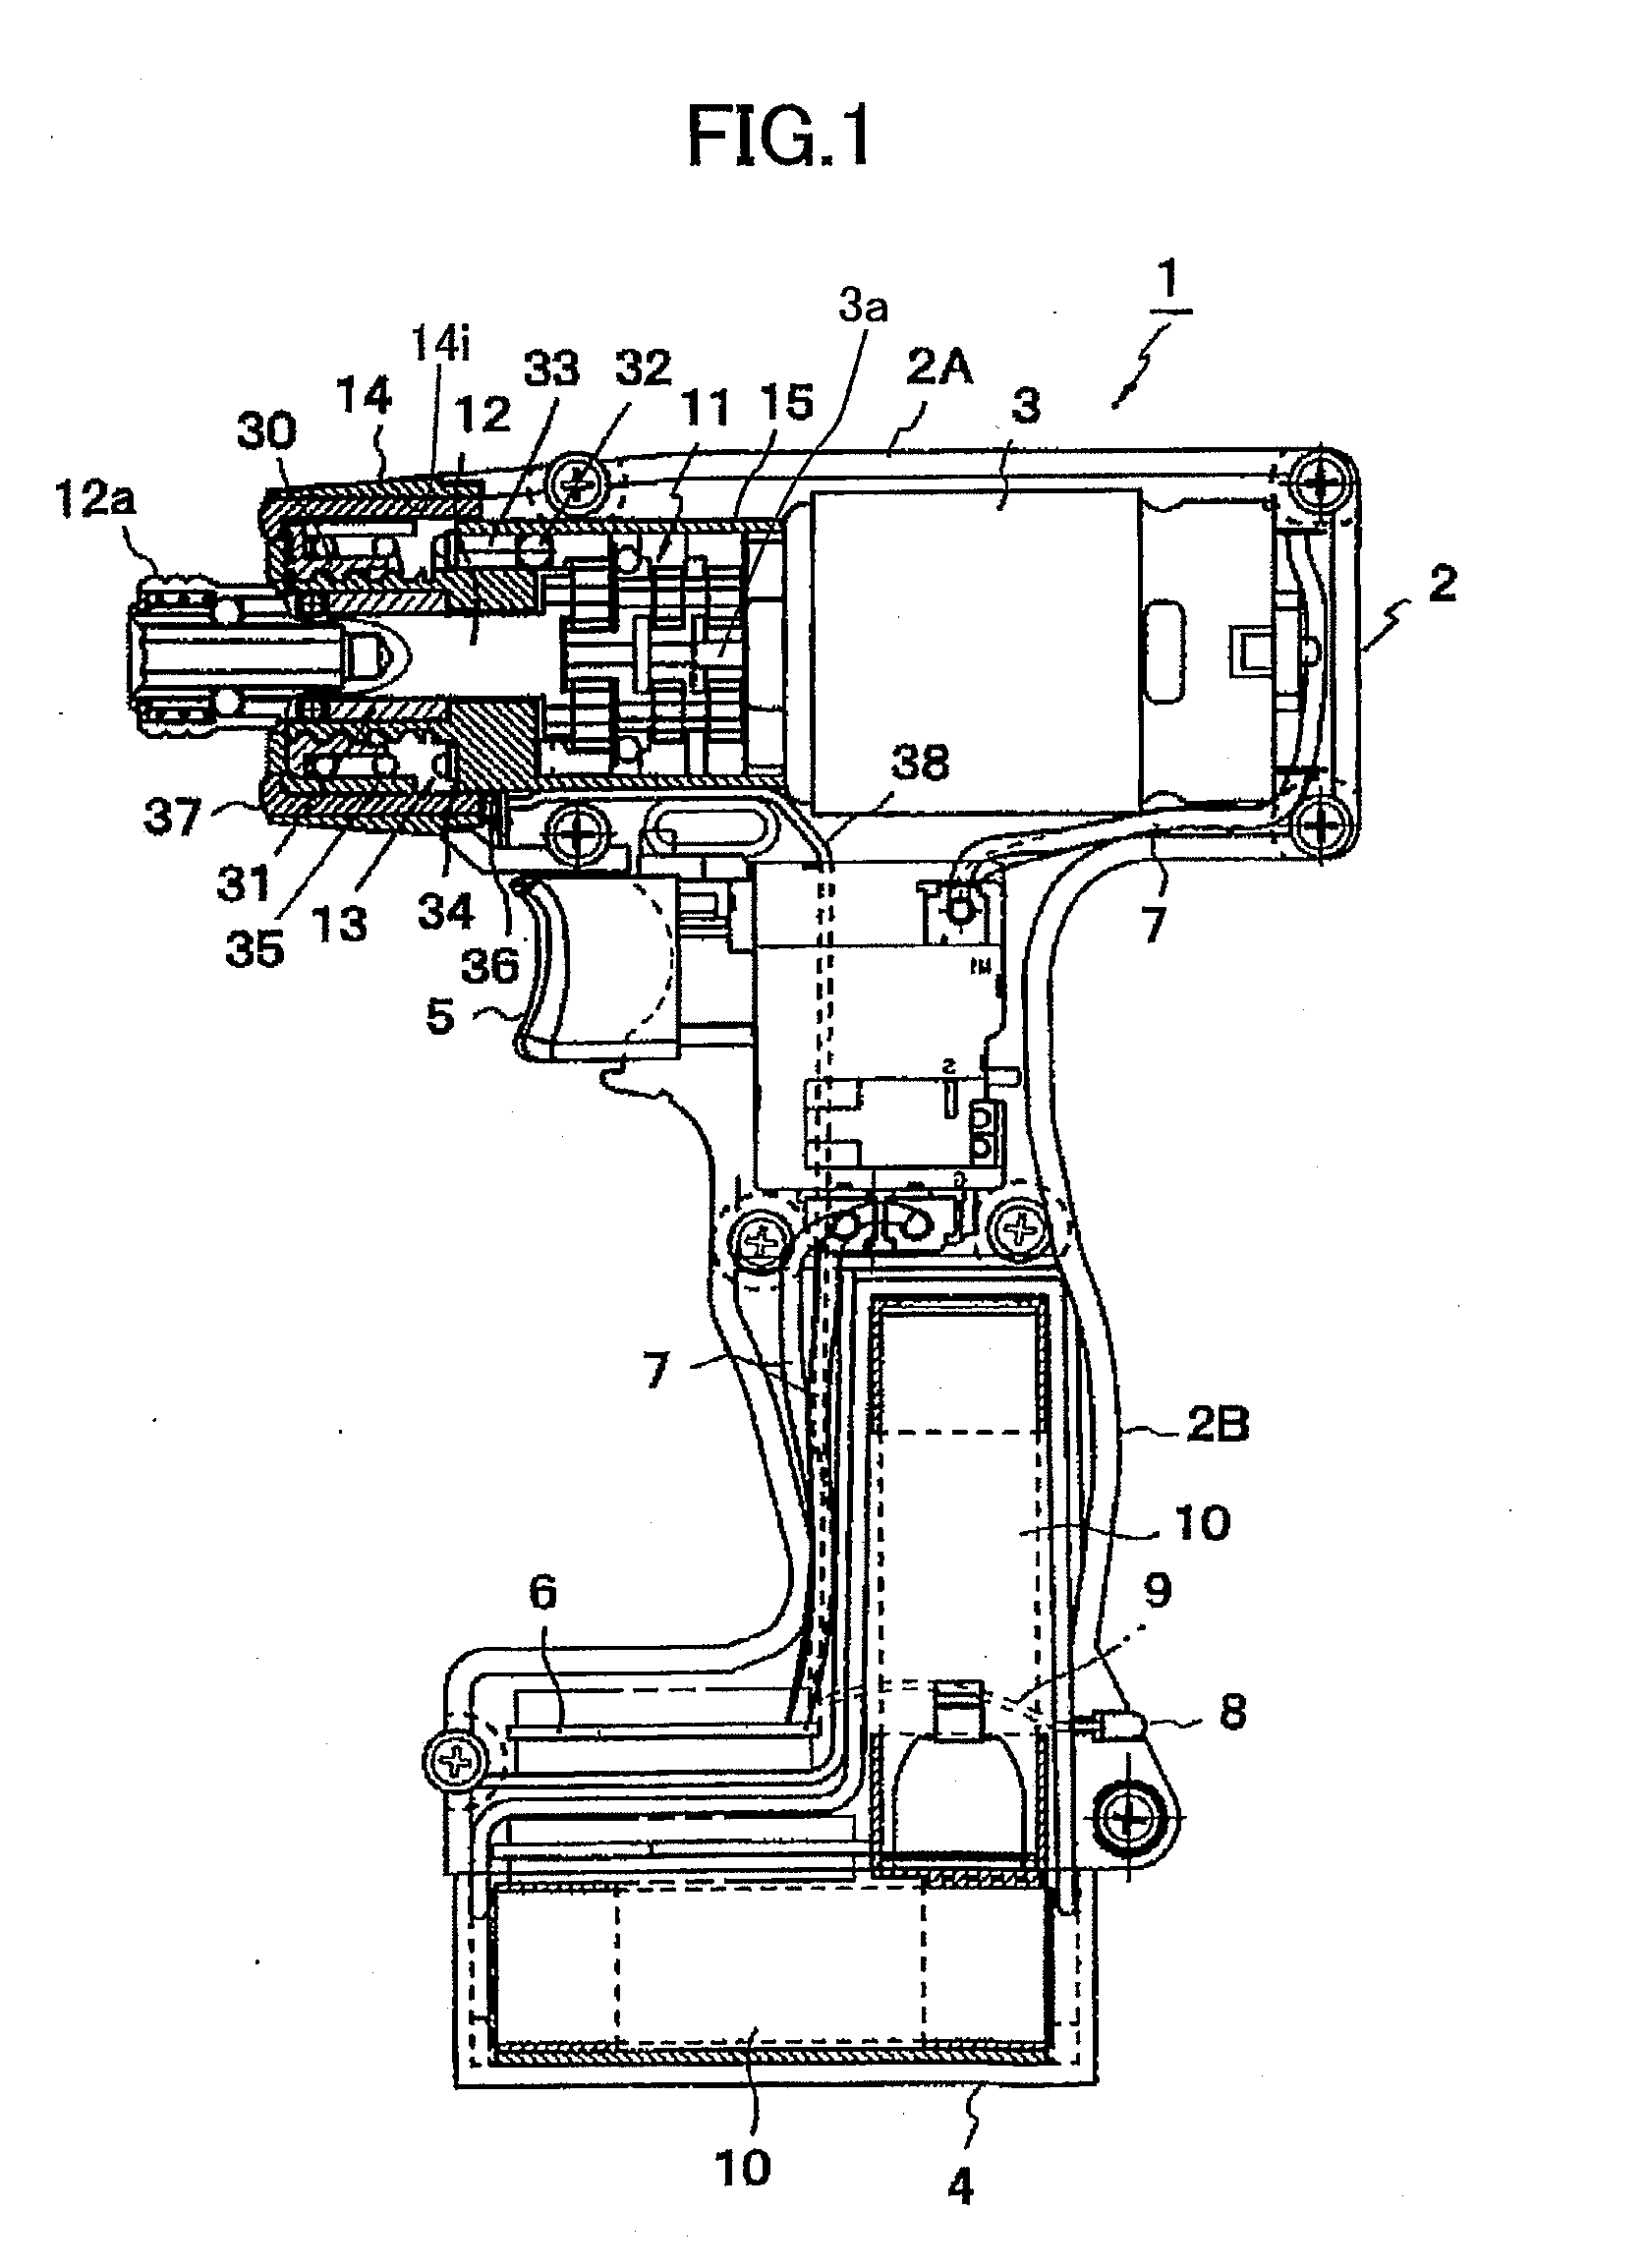 Electrical Power Tool